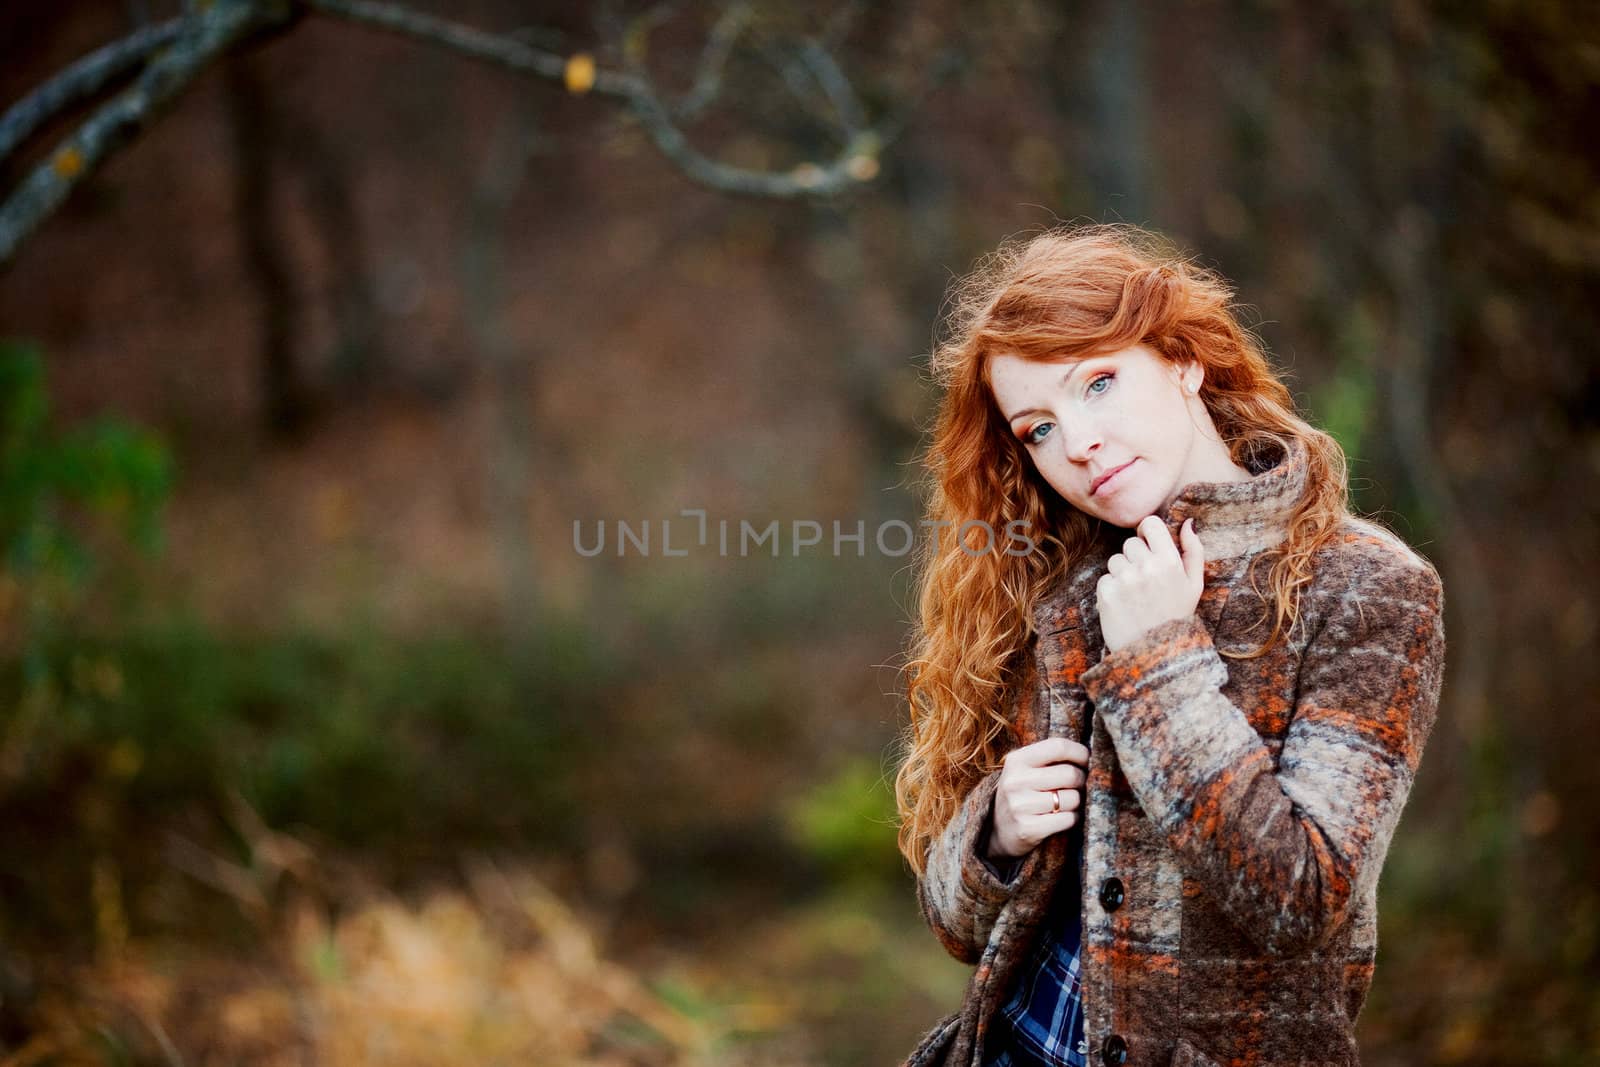 The red-haired girl in autumn leaves 
outdoor shot